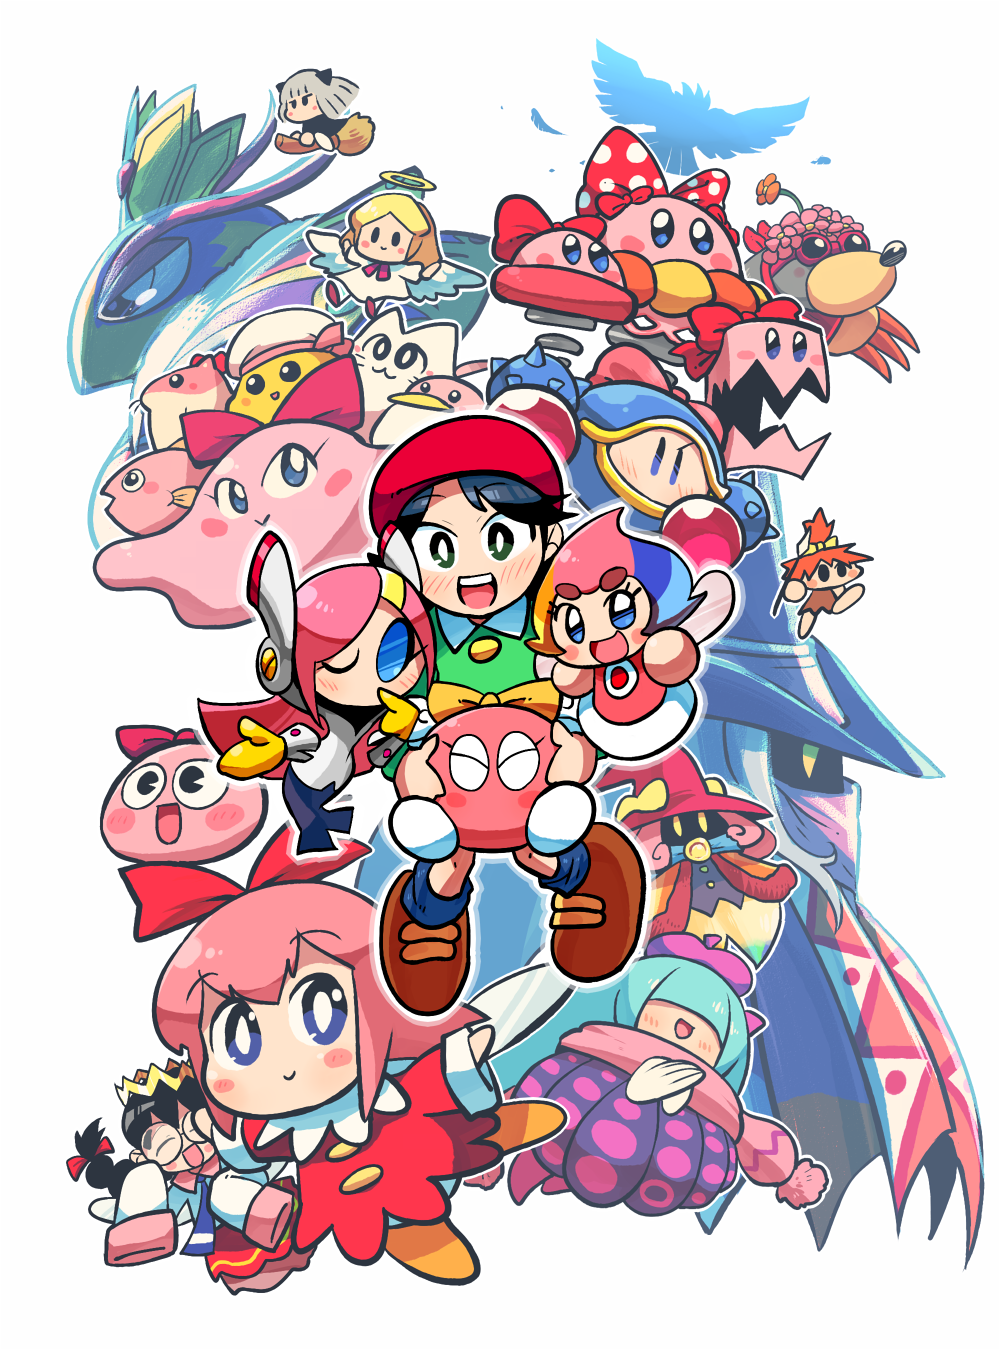 6+girls adeleine adventures_of_lolo angel_(kirby) armor beret bird black_hair blob_(kirby) blonde_hair blue_hair blue_legwear blush_stickers bouncy_(kirby) bouncy_sis_(kirby) bow boxy_(kirby) broom broom_riding brown_shoes chuchu_(kirby) claycia commentary_request crown drawcia dress dyna_blade elline_(kirby) fairy_wings feathers female_gooey_(kirby) glasses green_dress hair_ribbon hal_laboratory_inc. hands_in_sleeves hat highres hoshi_no_kirby hoshi_no_kirby_2 hoshi_no_kirby_3 hoshi_no_kirby_64 hoshi_no_kirby_kagami_no_daimeikyuu hoshi_no_kirby_sanjou!_dorocche_dan hoshi_no_kirby_super_deluxe hoshi_no_kirby_ultra_super_deluxe hoshi_no_kirby_wii iron_mam keke_(kirby) kirby's_dream_land_2 kirby's_dream_land_3 kirby:_planet_robobot kirby_(series) kirby_64 kirby_and_the_rainbow_curse kirby_canvas_curse kirby_squeak_squad kirby_triple_deluxe lalala_(kirby) mine_(kirby) mrs._moley multicolored_hair multiple_girls nintendo nyupun_(kirby) orange_hair paintra pick_(kirby) pink_hair pitch_mama polearm purple_hat queen_fairy queen_sectonia rariatto_(ganguri) red_bow red_dress red_hat red_ribbon ribbon ribbon_(kirby) round_glasses shiro_(kirby) shoes silver_hair simple_background sleeves_past_wrists spear susie_(kirby) touch_kirby! touch_kirby!_super_rainbow tress_ribbon weapon white_background wings witch_hat yariko_(kirby) yellow_bow yellow_eyes